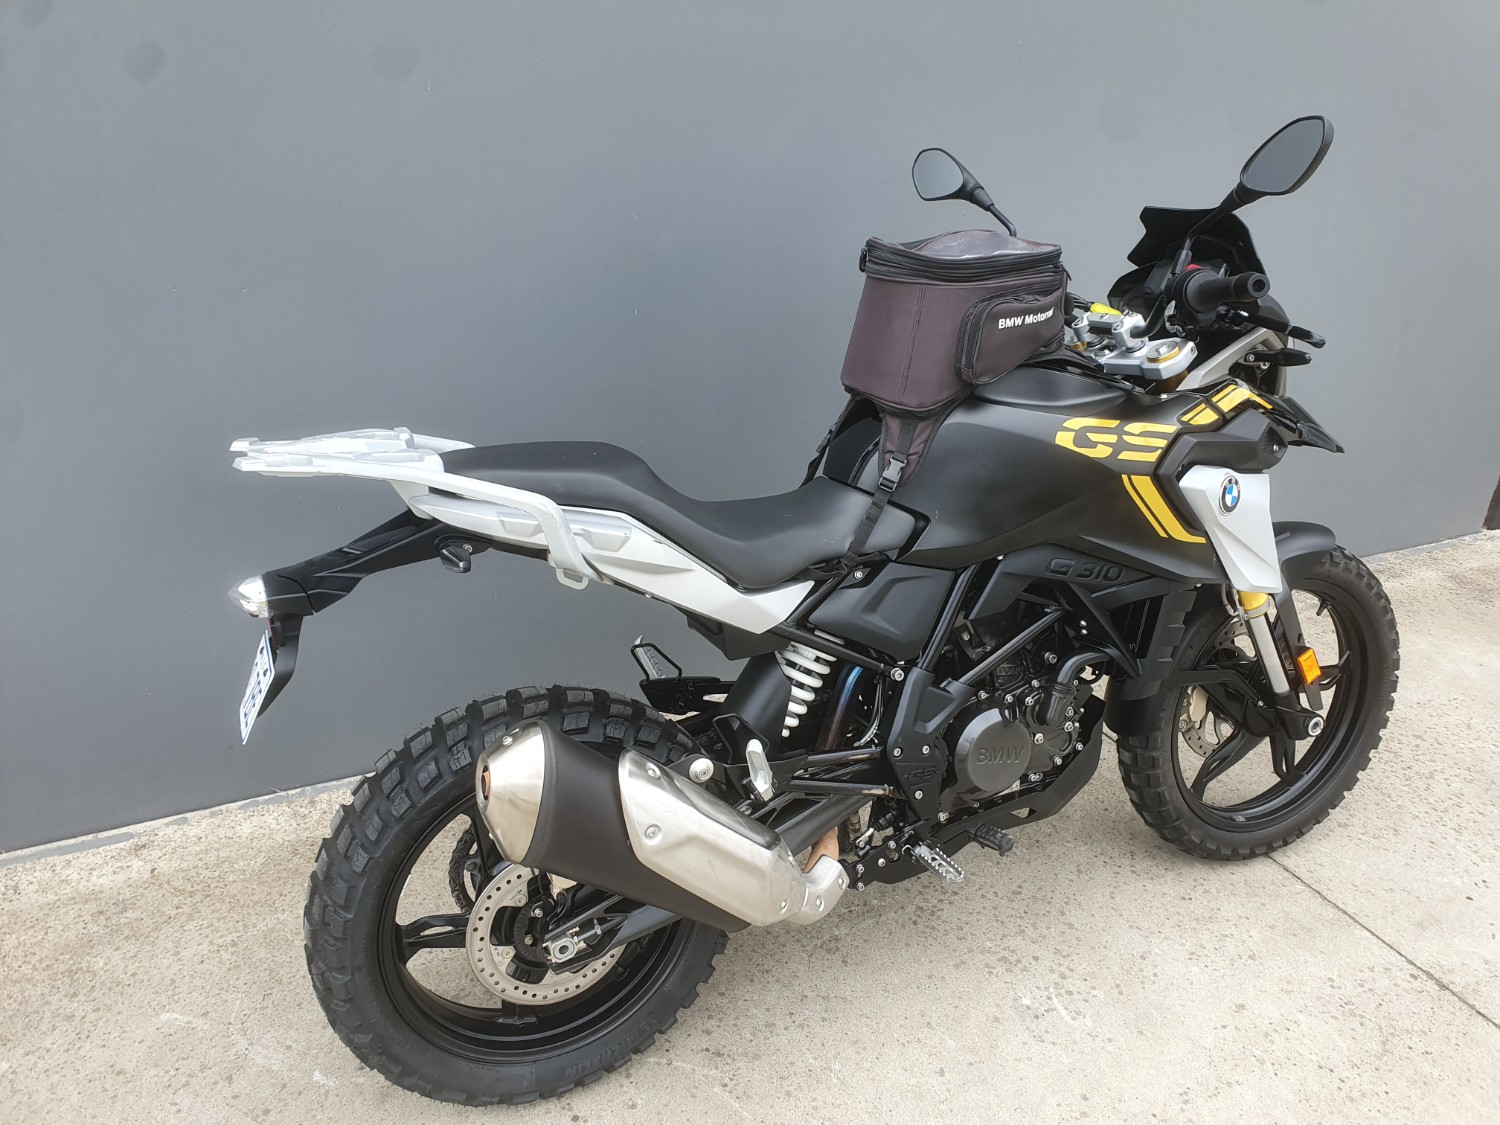 2021 BMW G 310 GS Motorcycle Image 10